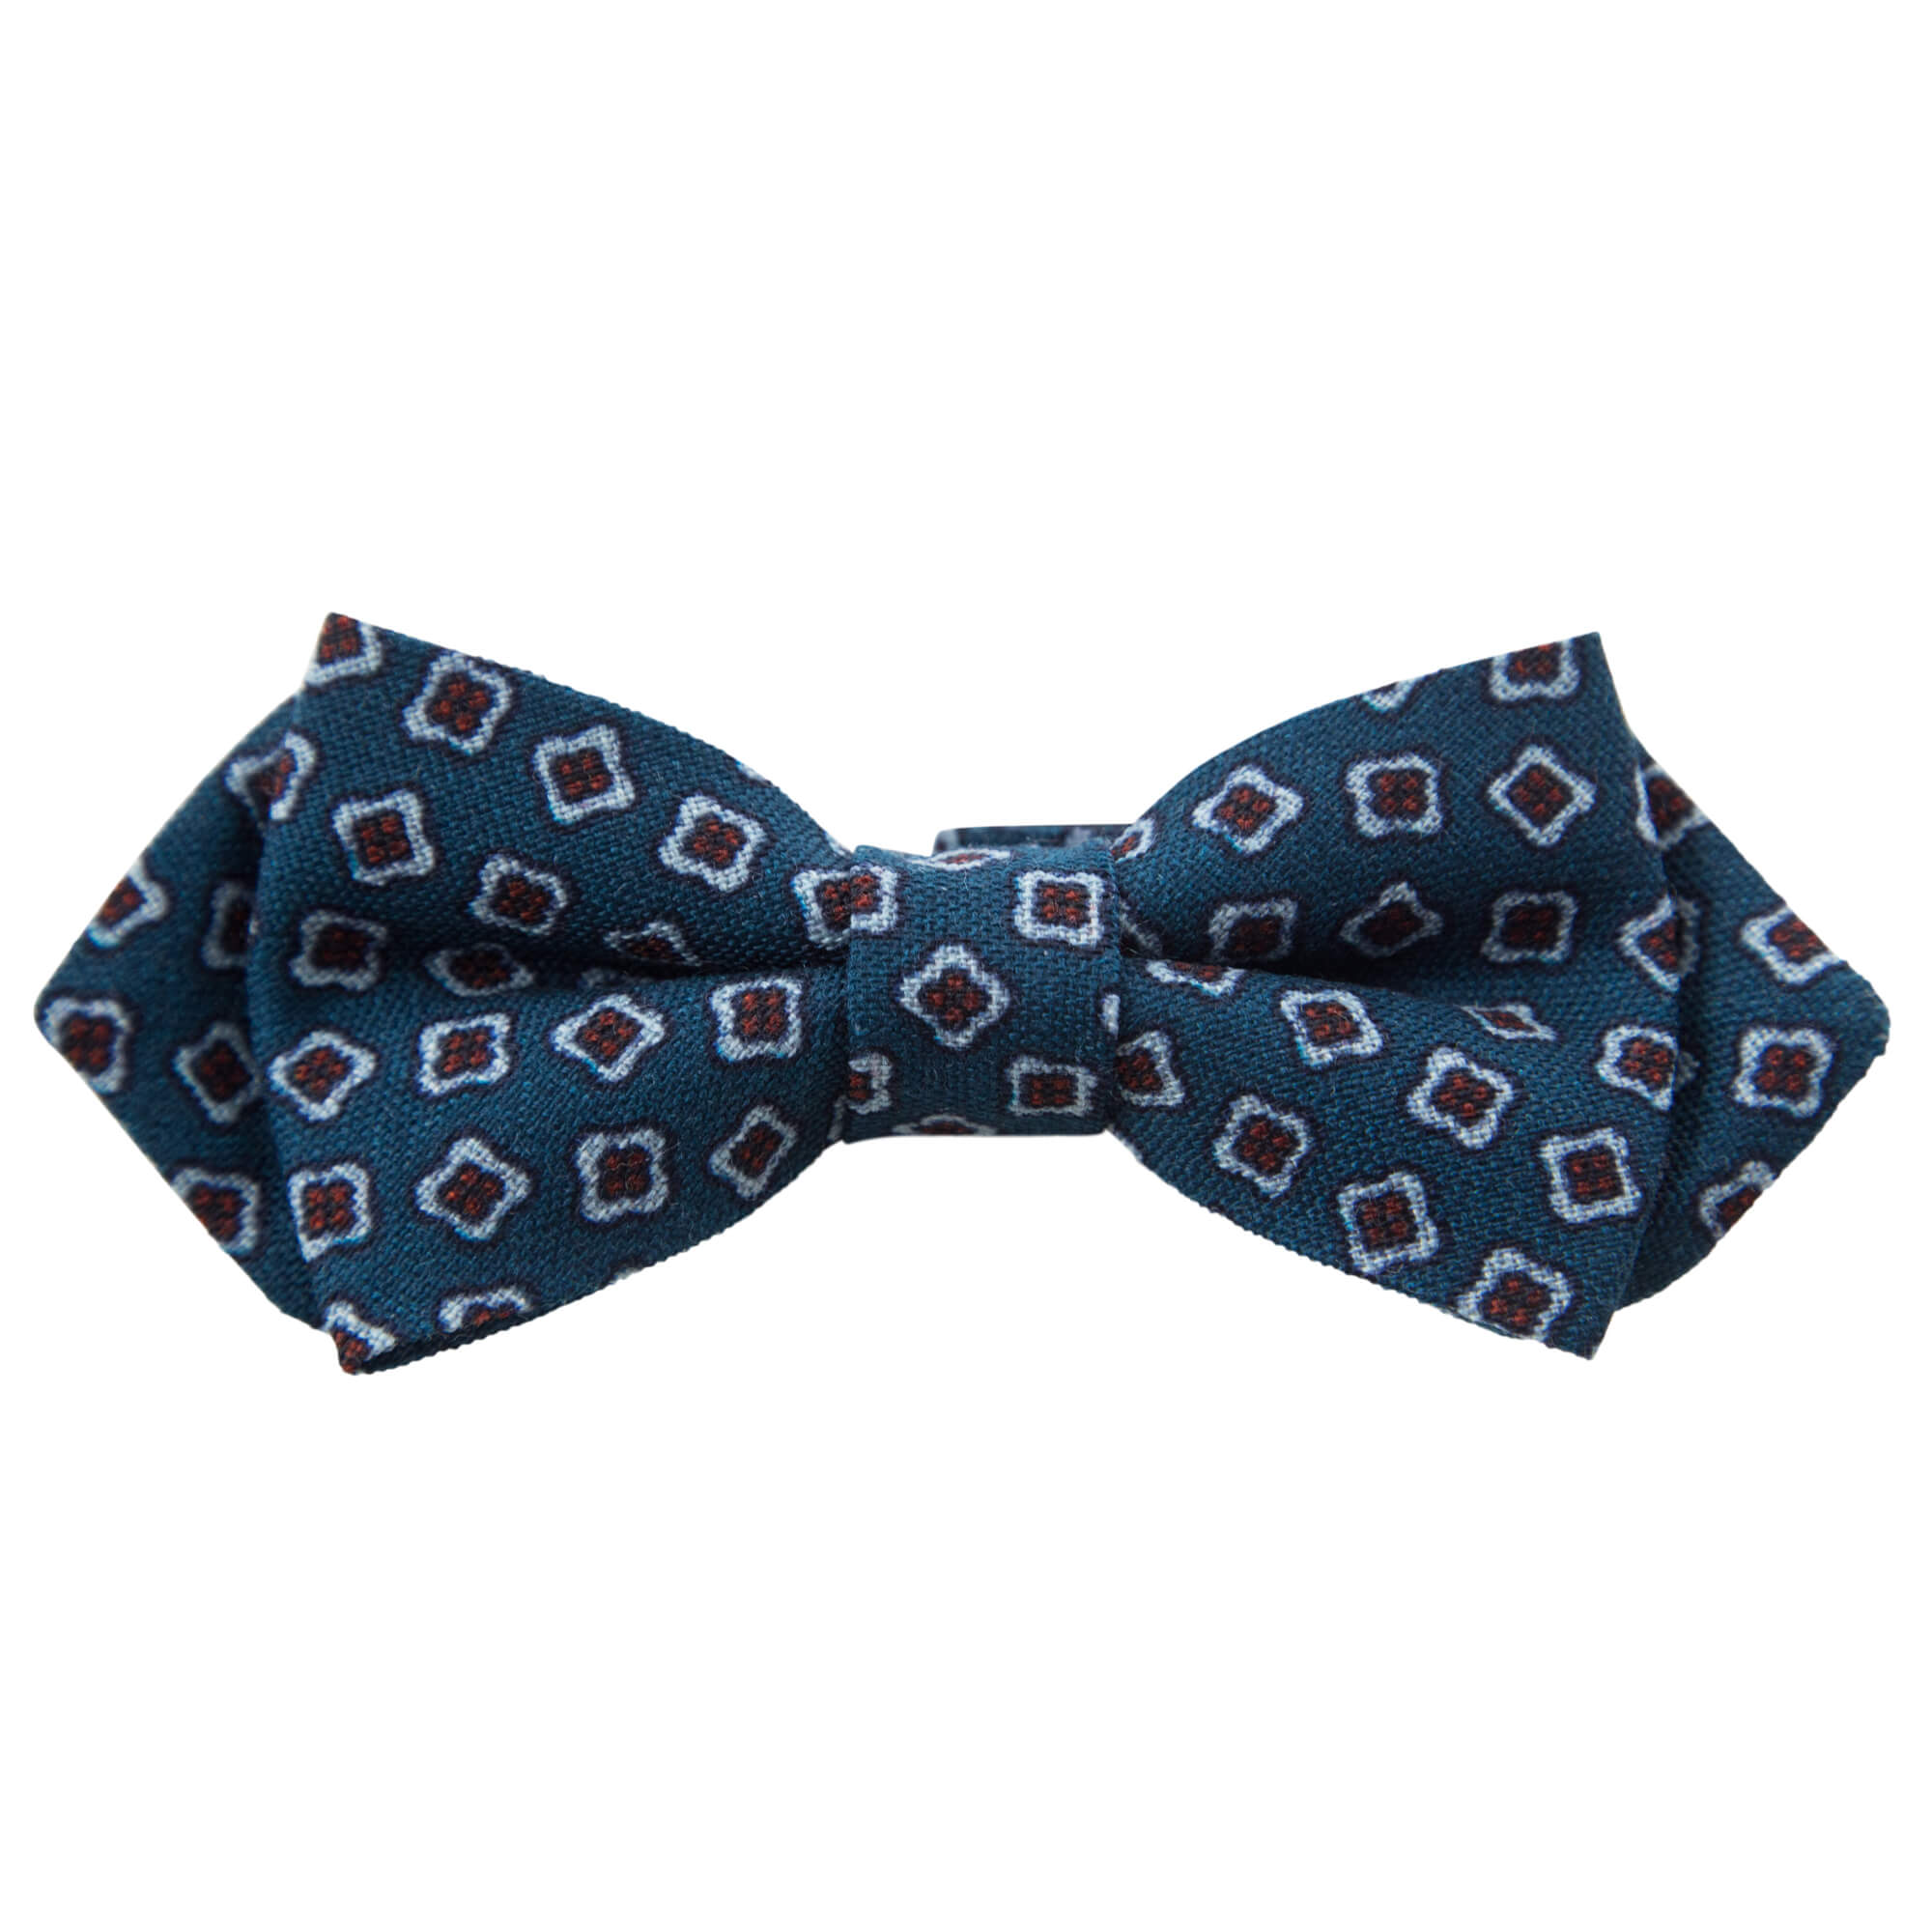 TEAL WITH WHITE AND RED SQUARES BOW TIE